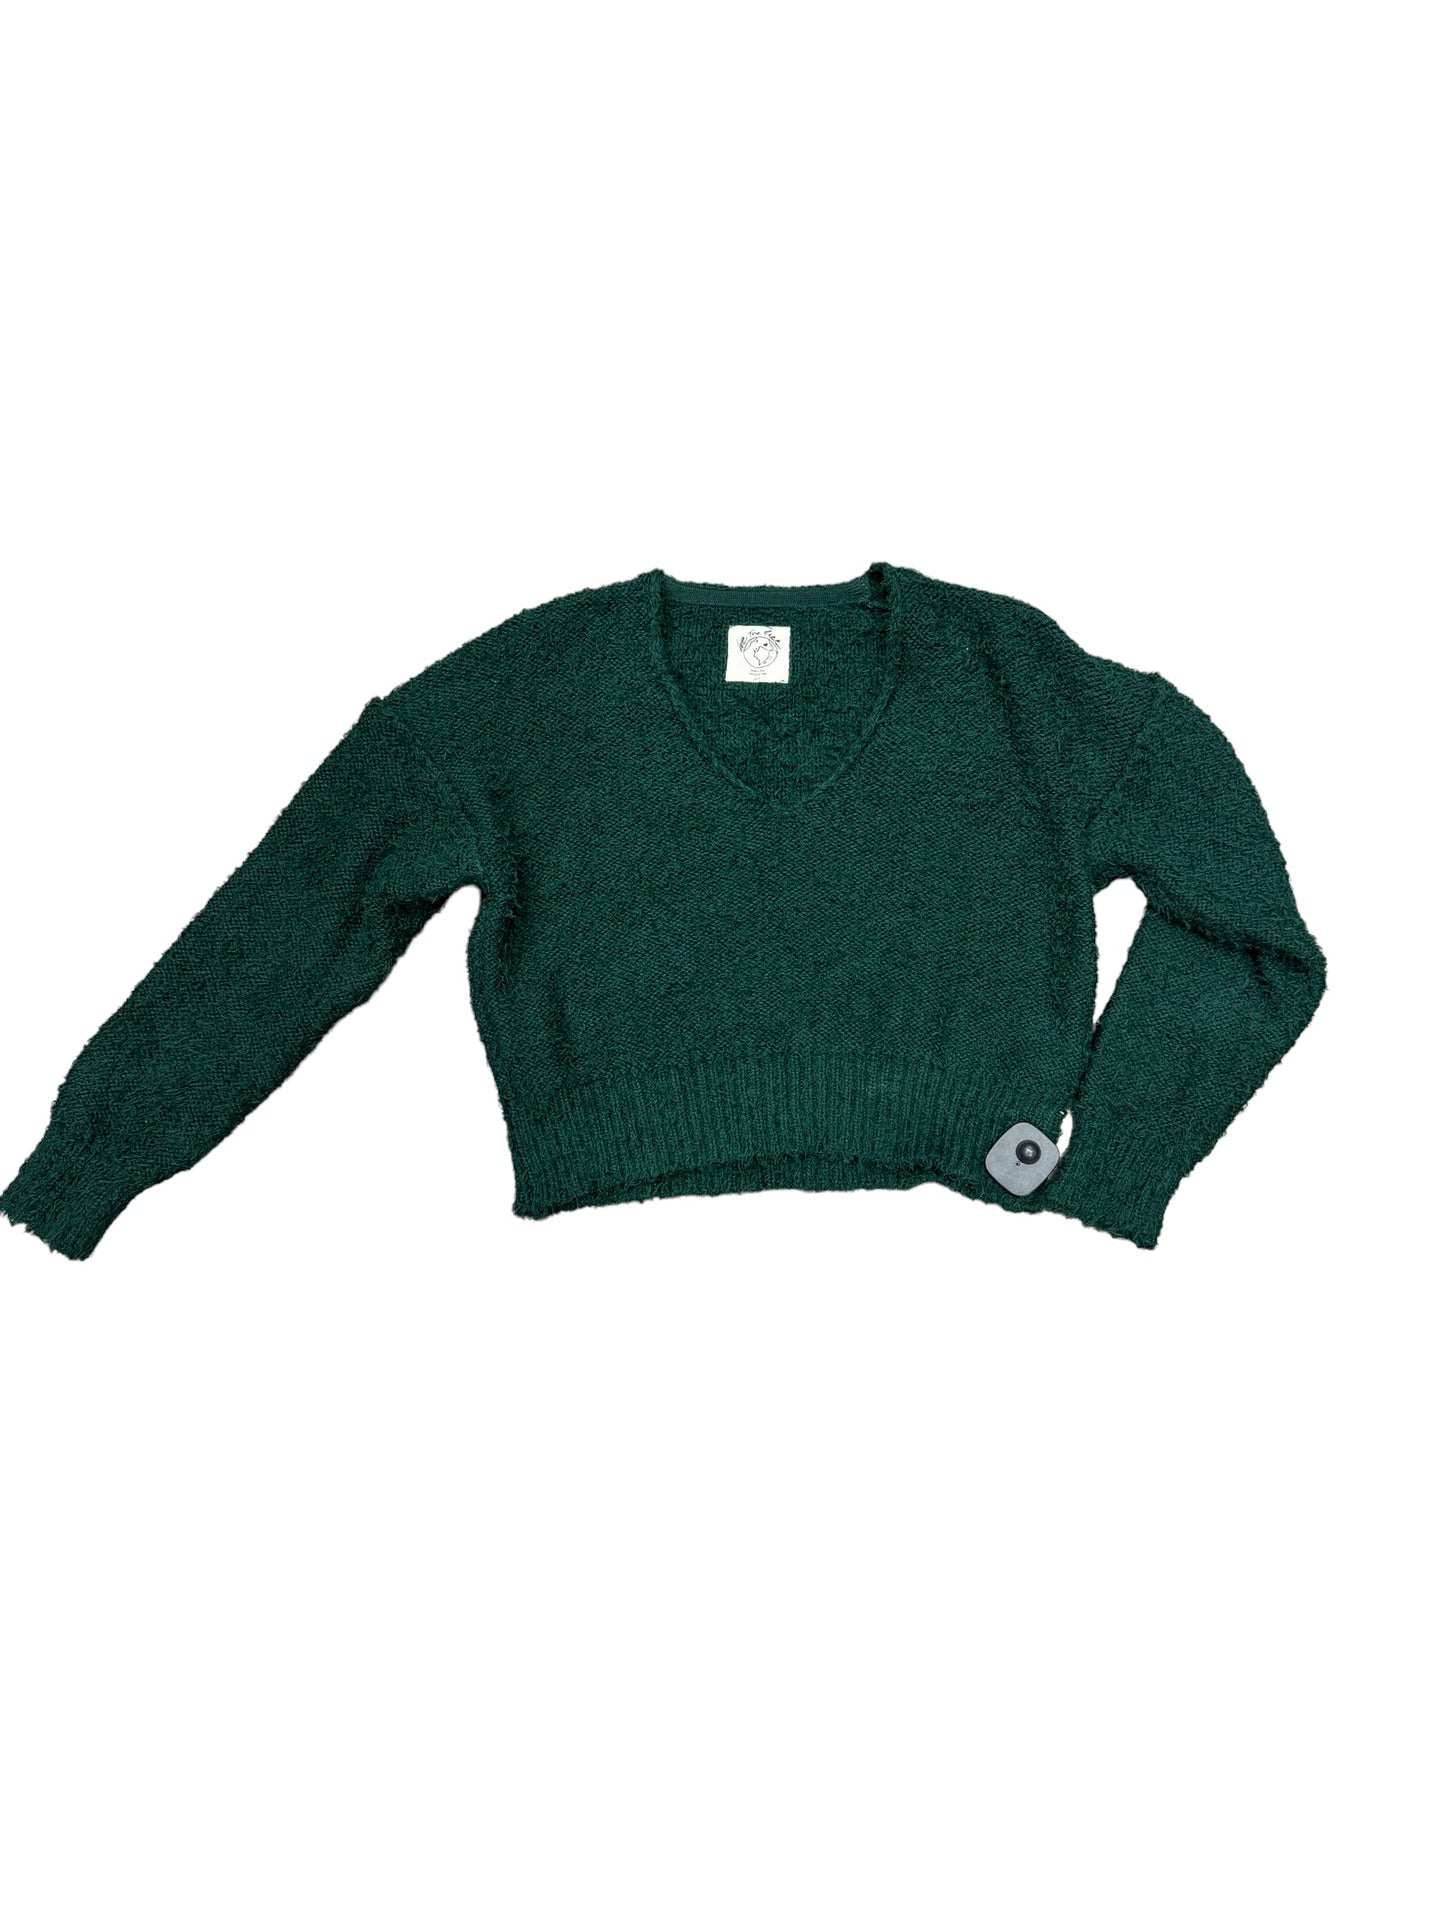 Sweater By We The Free  Size: Xs